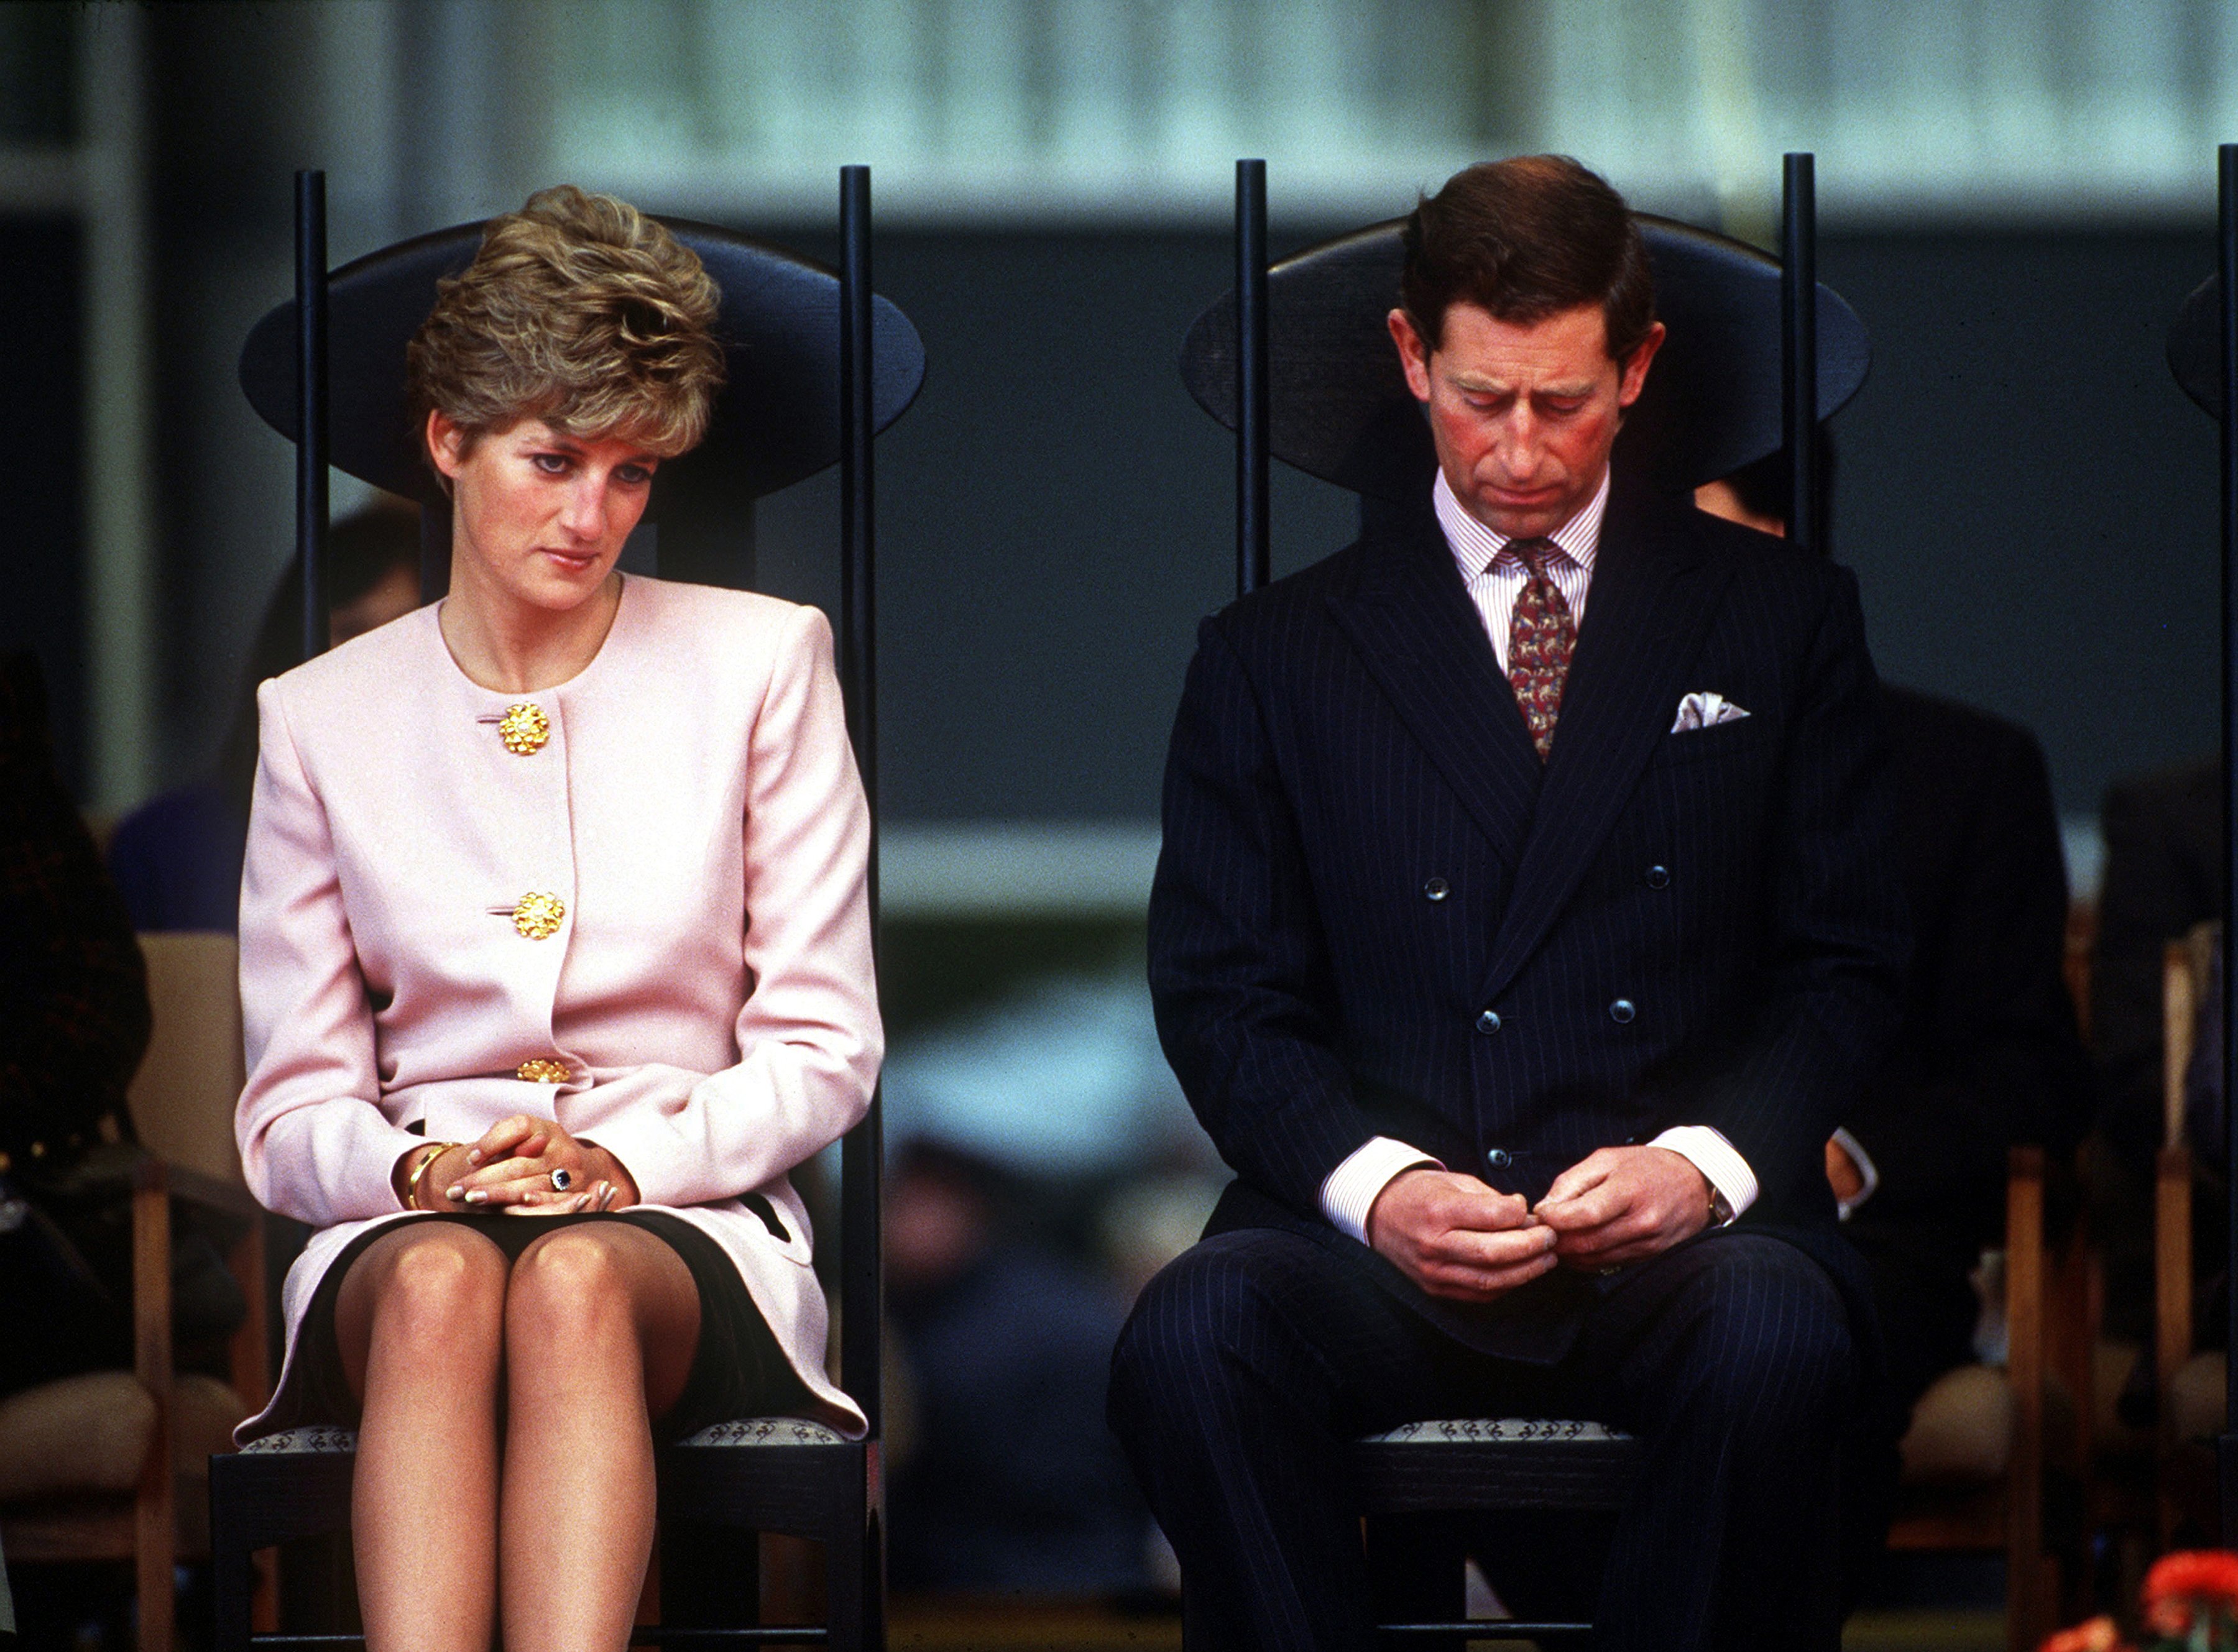 The Prince and Princess of Wales attend a welcome ceremony in Toronto at the beginning of their Canadian tour, October 1991 | Photo: Getty Images